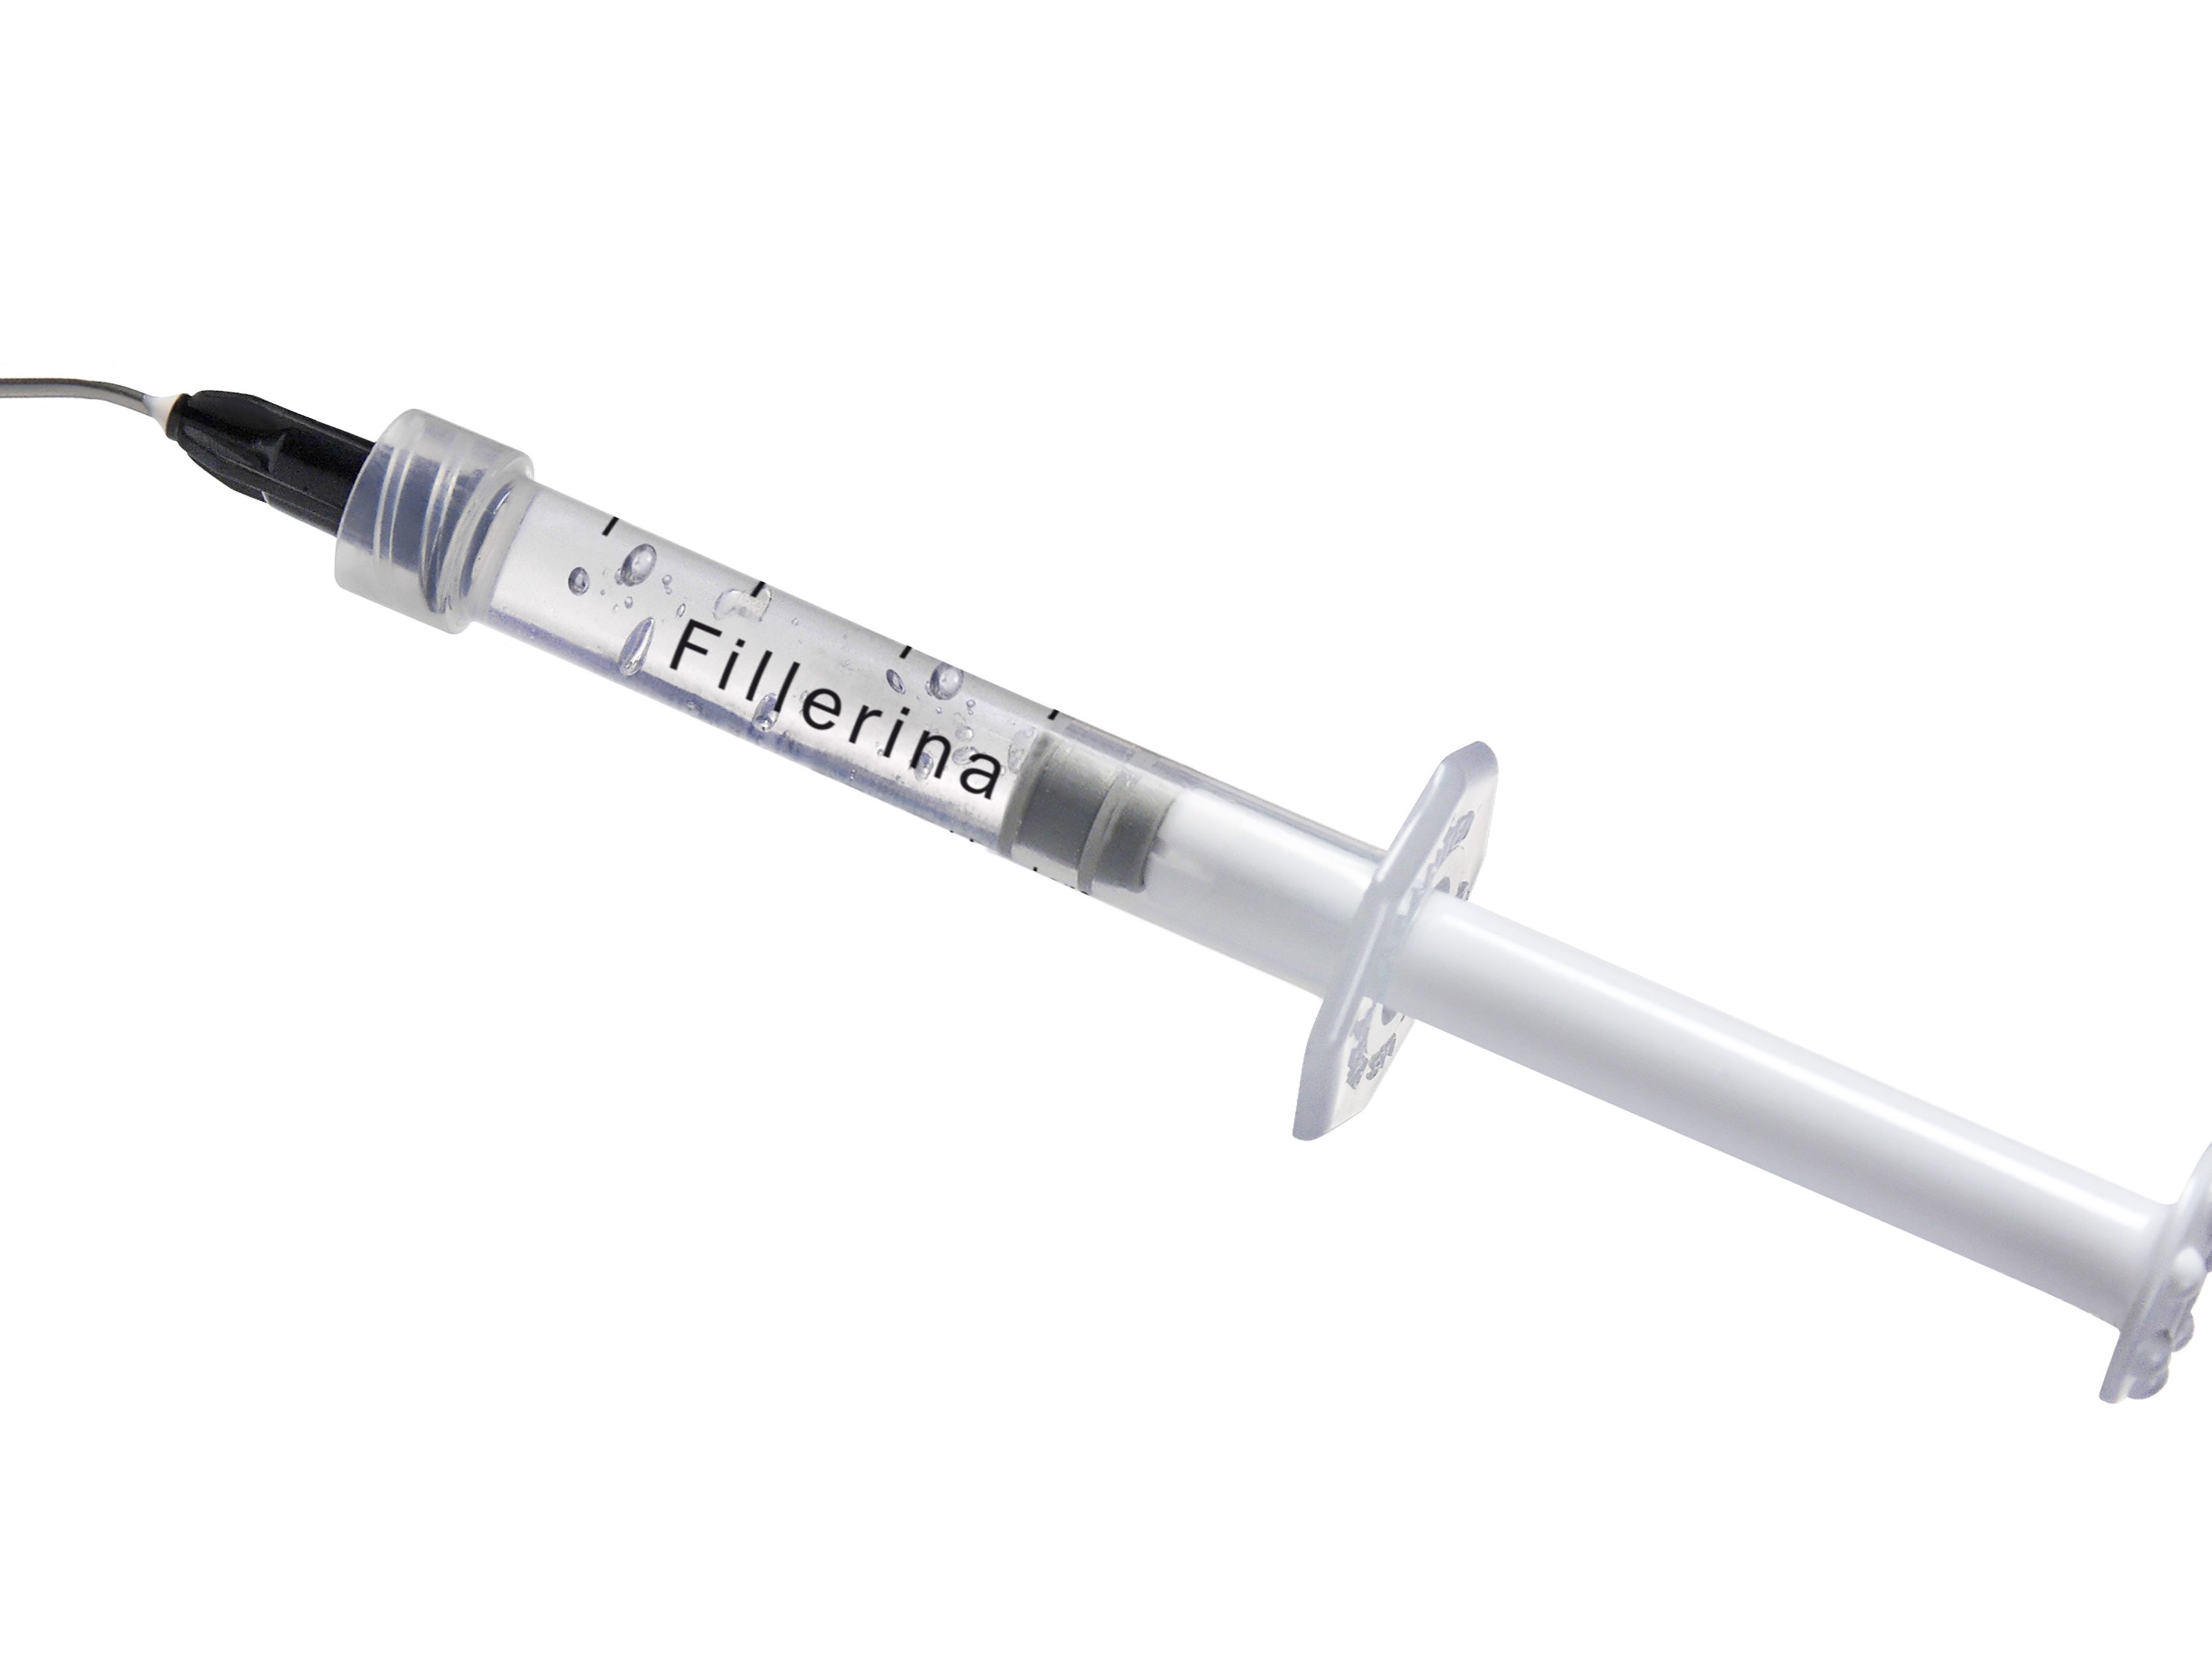 No-needle filler takes the world by storm